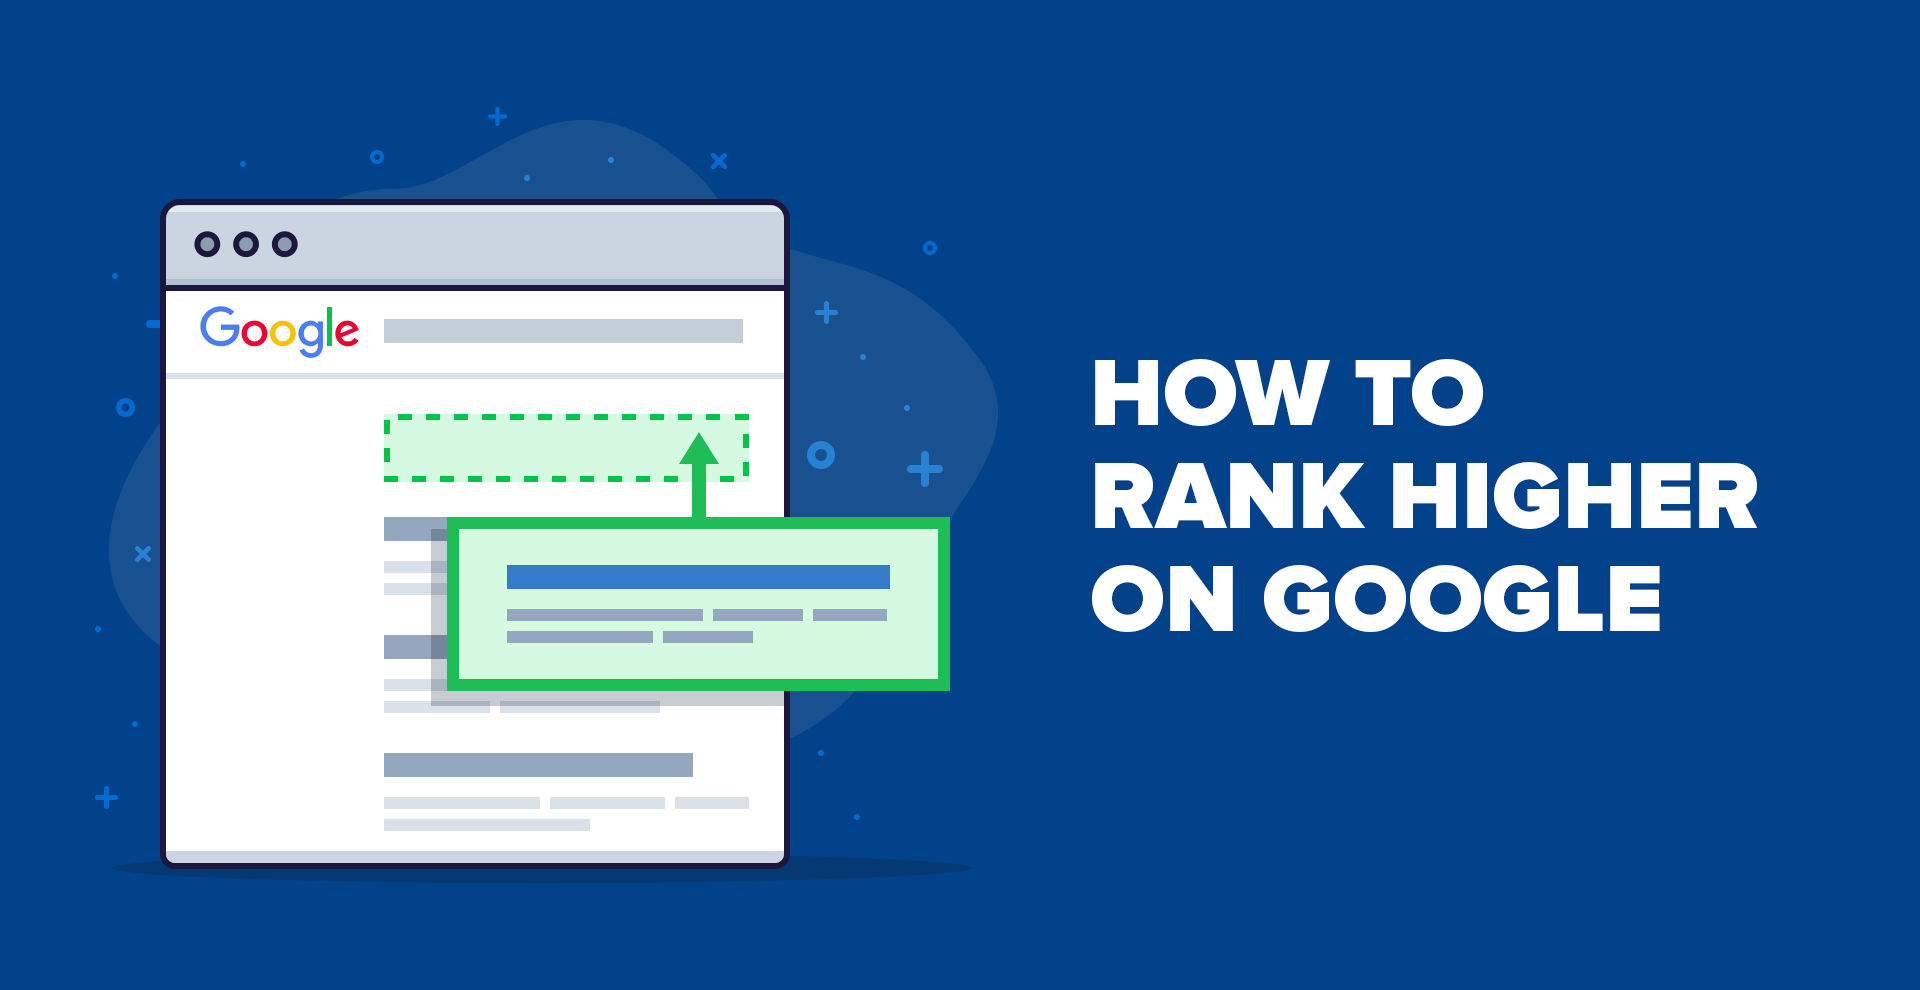 How to Rank on Google Without Backlinks